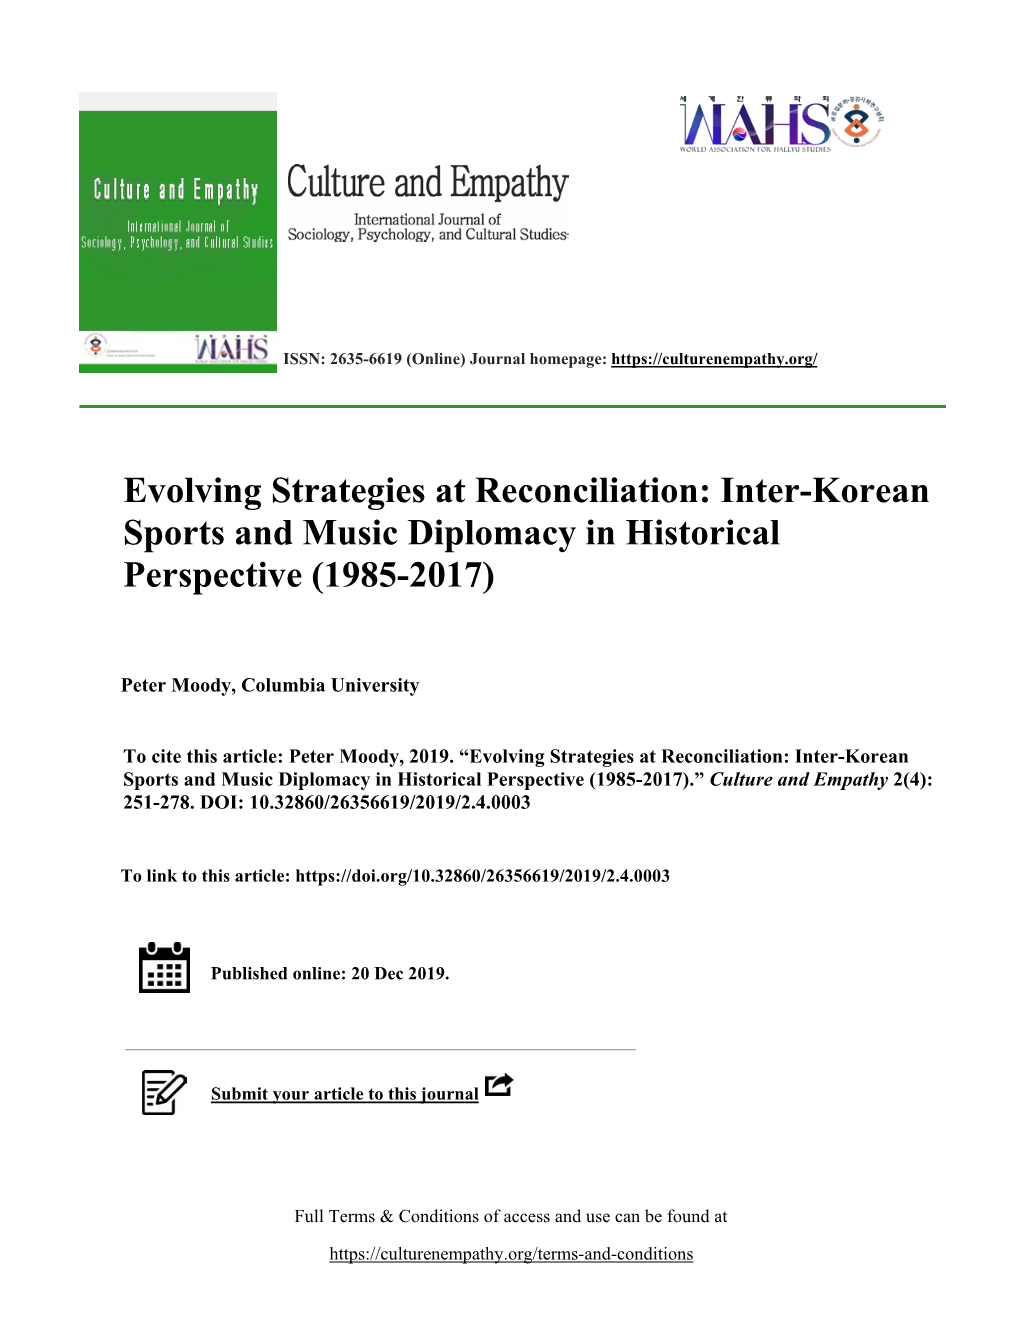 Evolving Strategies at Reconciliation: Inter-Korean Sports and Music Diplomacy in Historical Perspective (1985-2017)